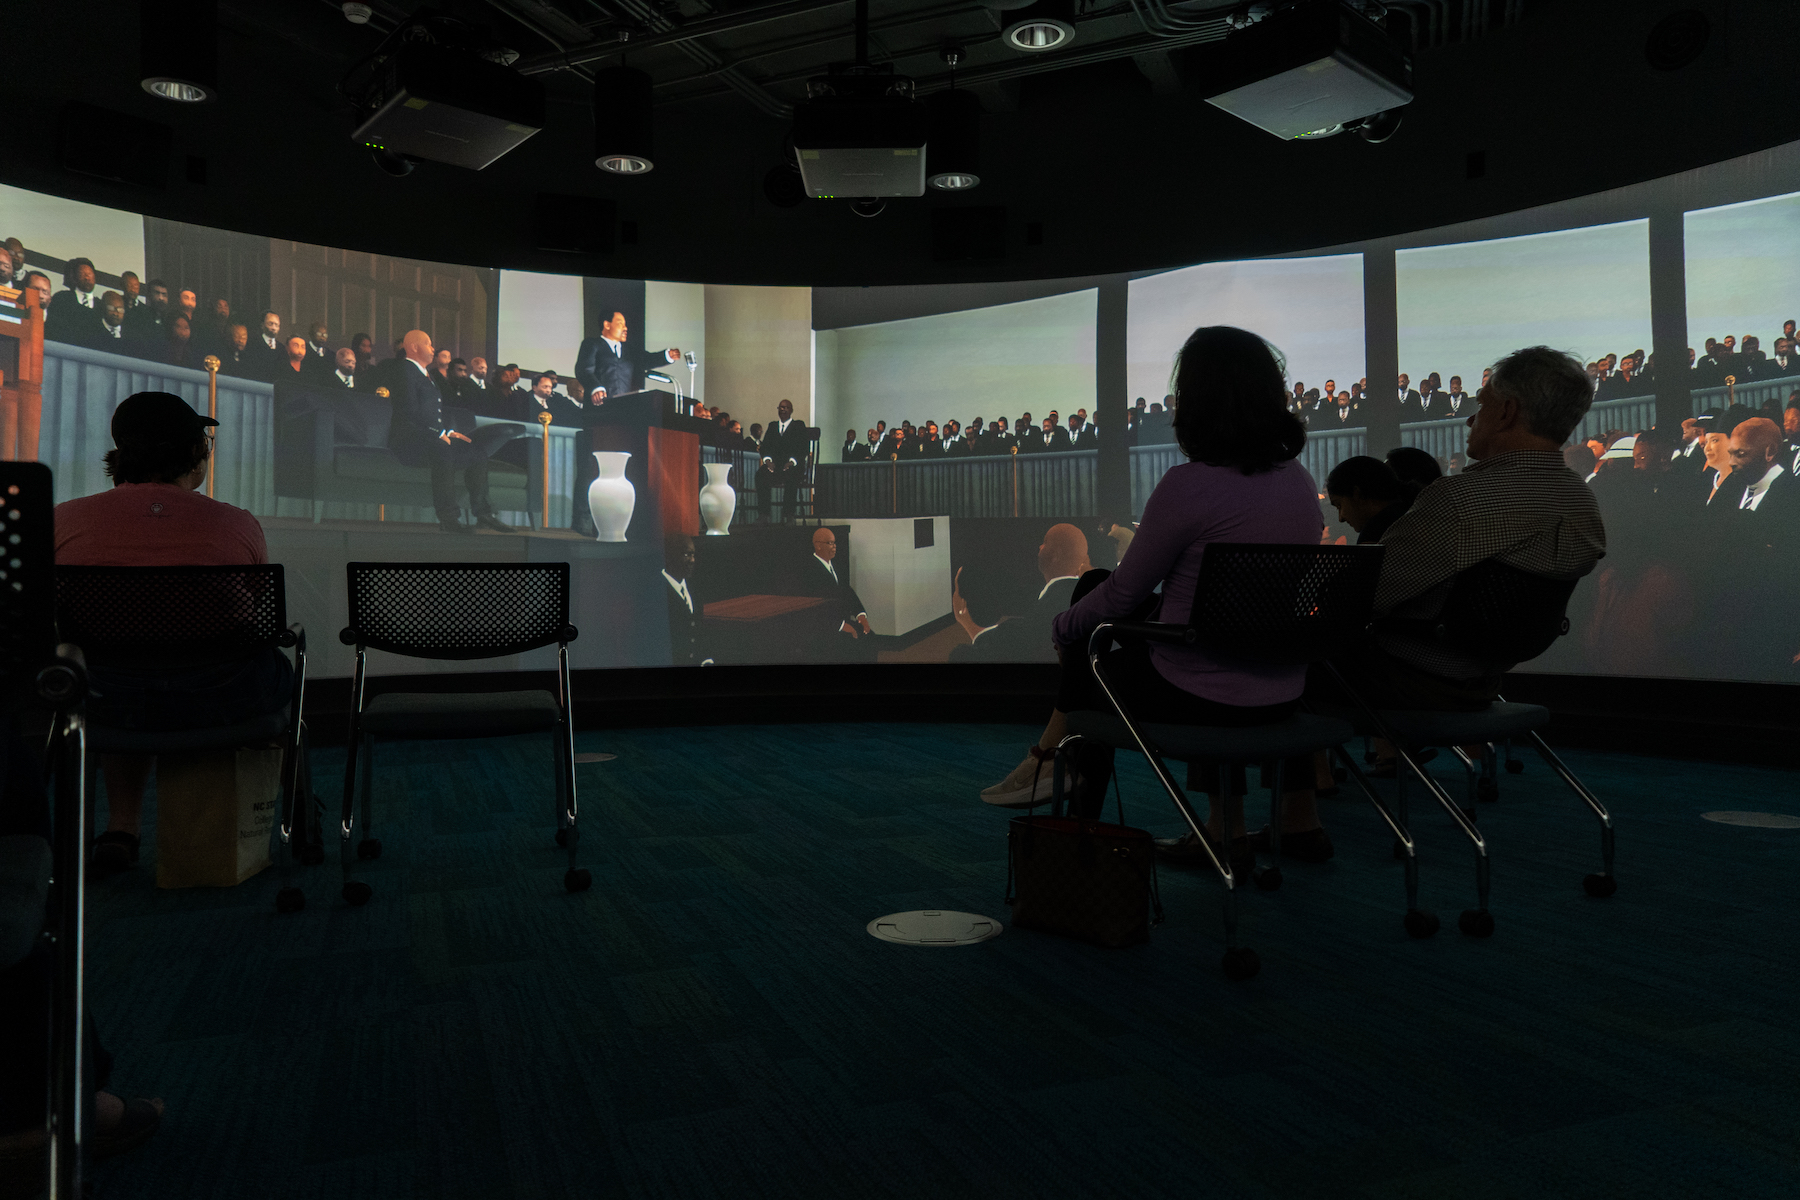 large curved screen showing a computer animated version of Dr. Martin Luther King Jr